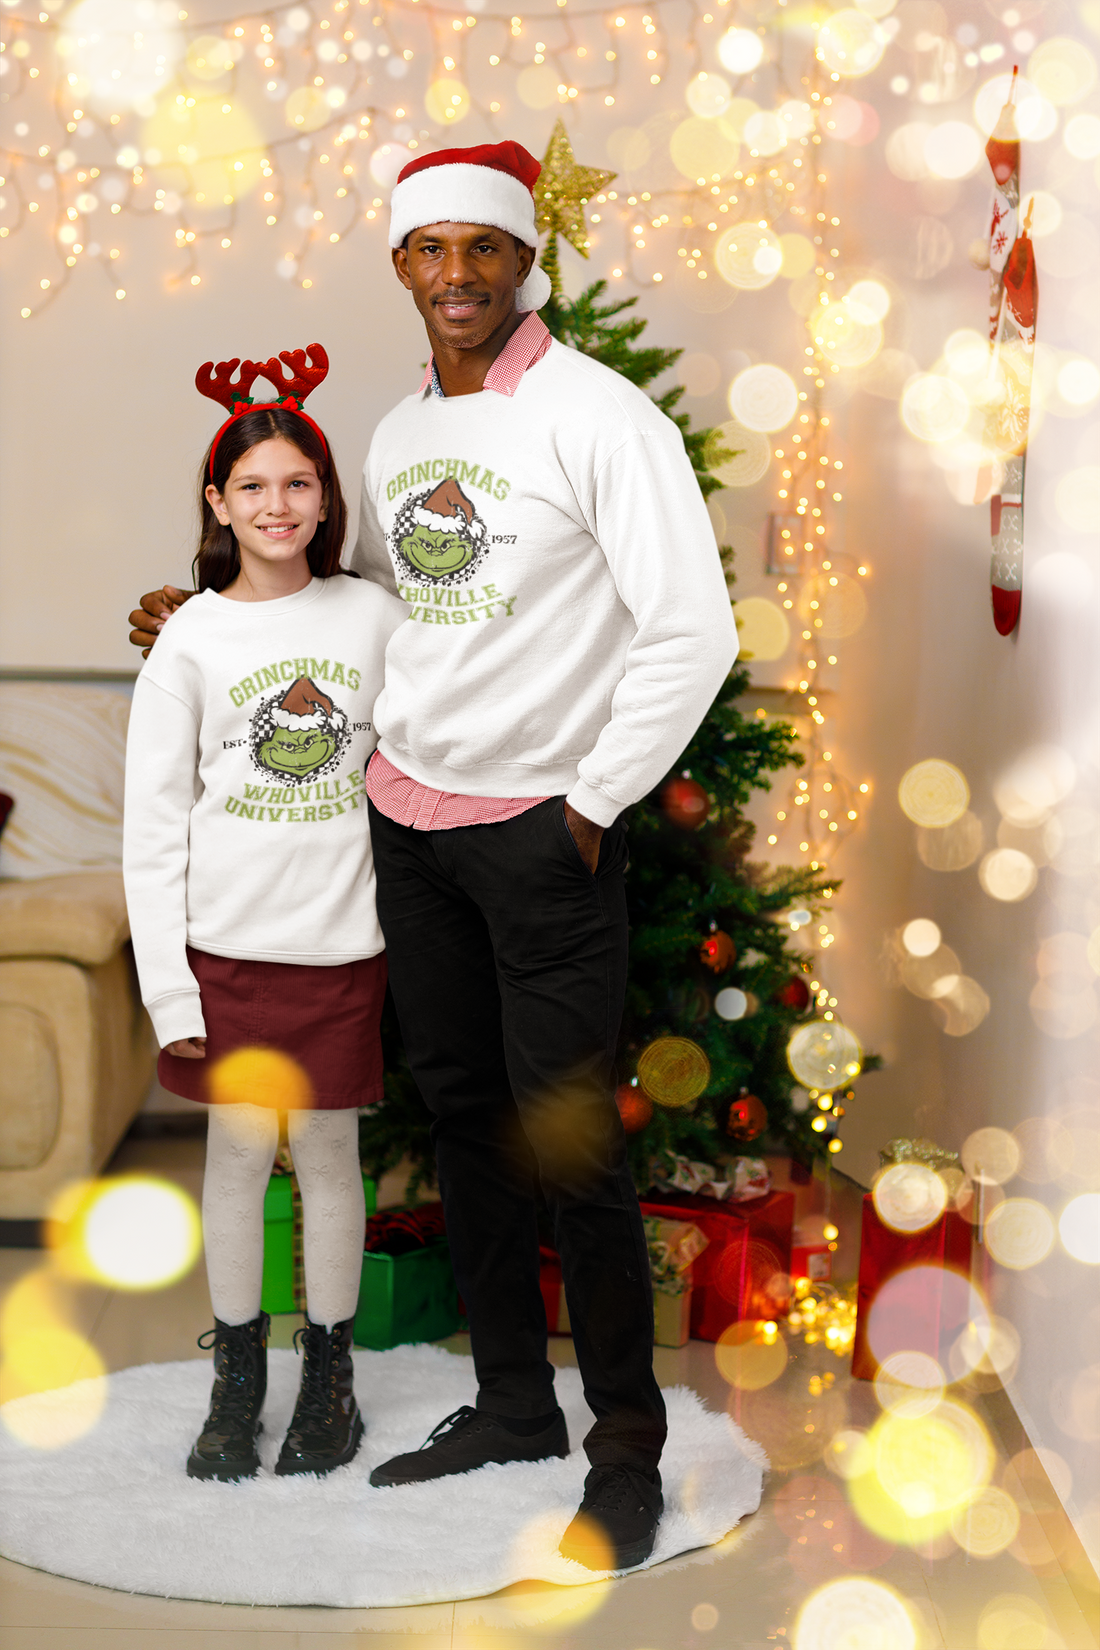 Twinkling with Togetherness: Adorable Matching Grinchmas Christmas Jumpers for the Whole Family!